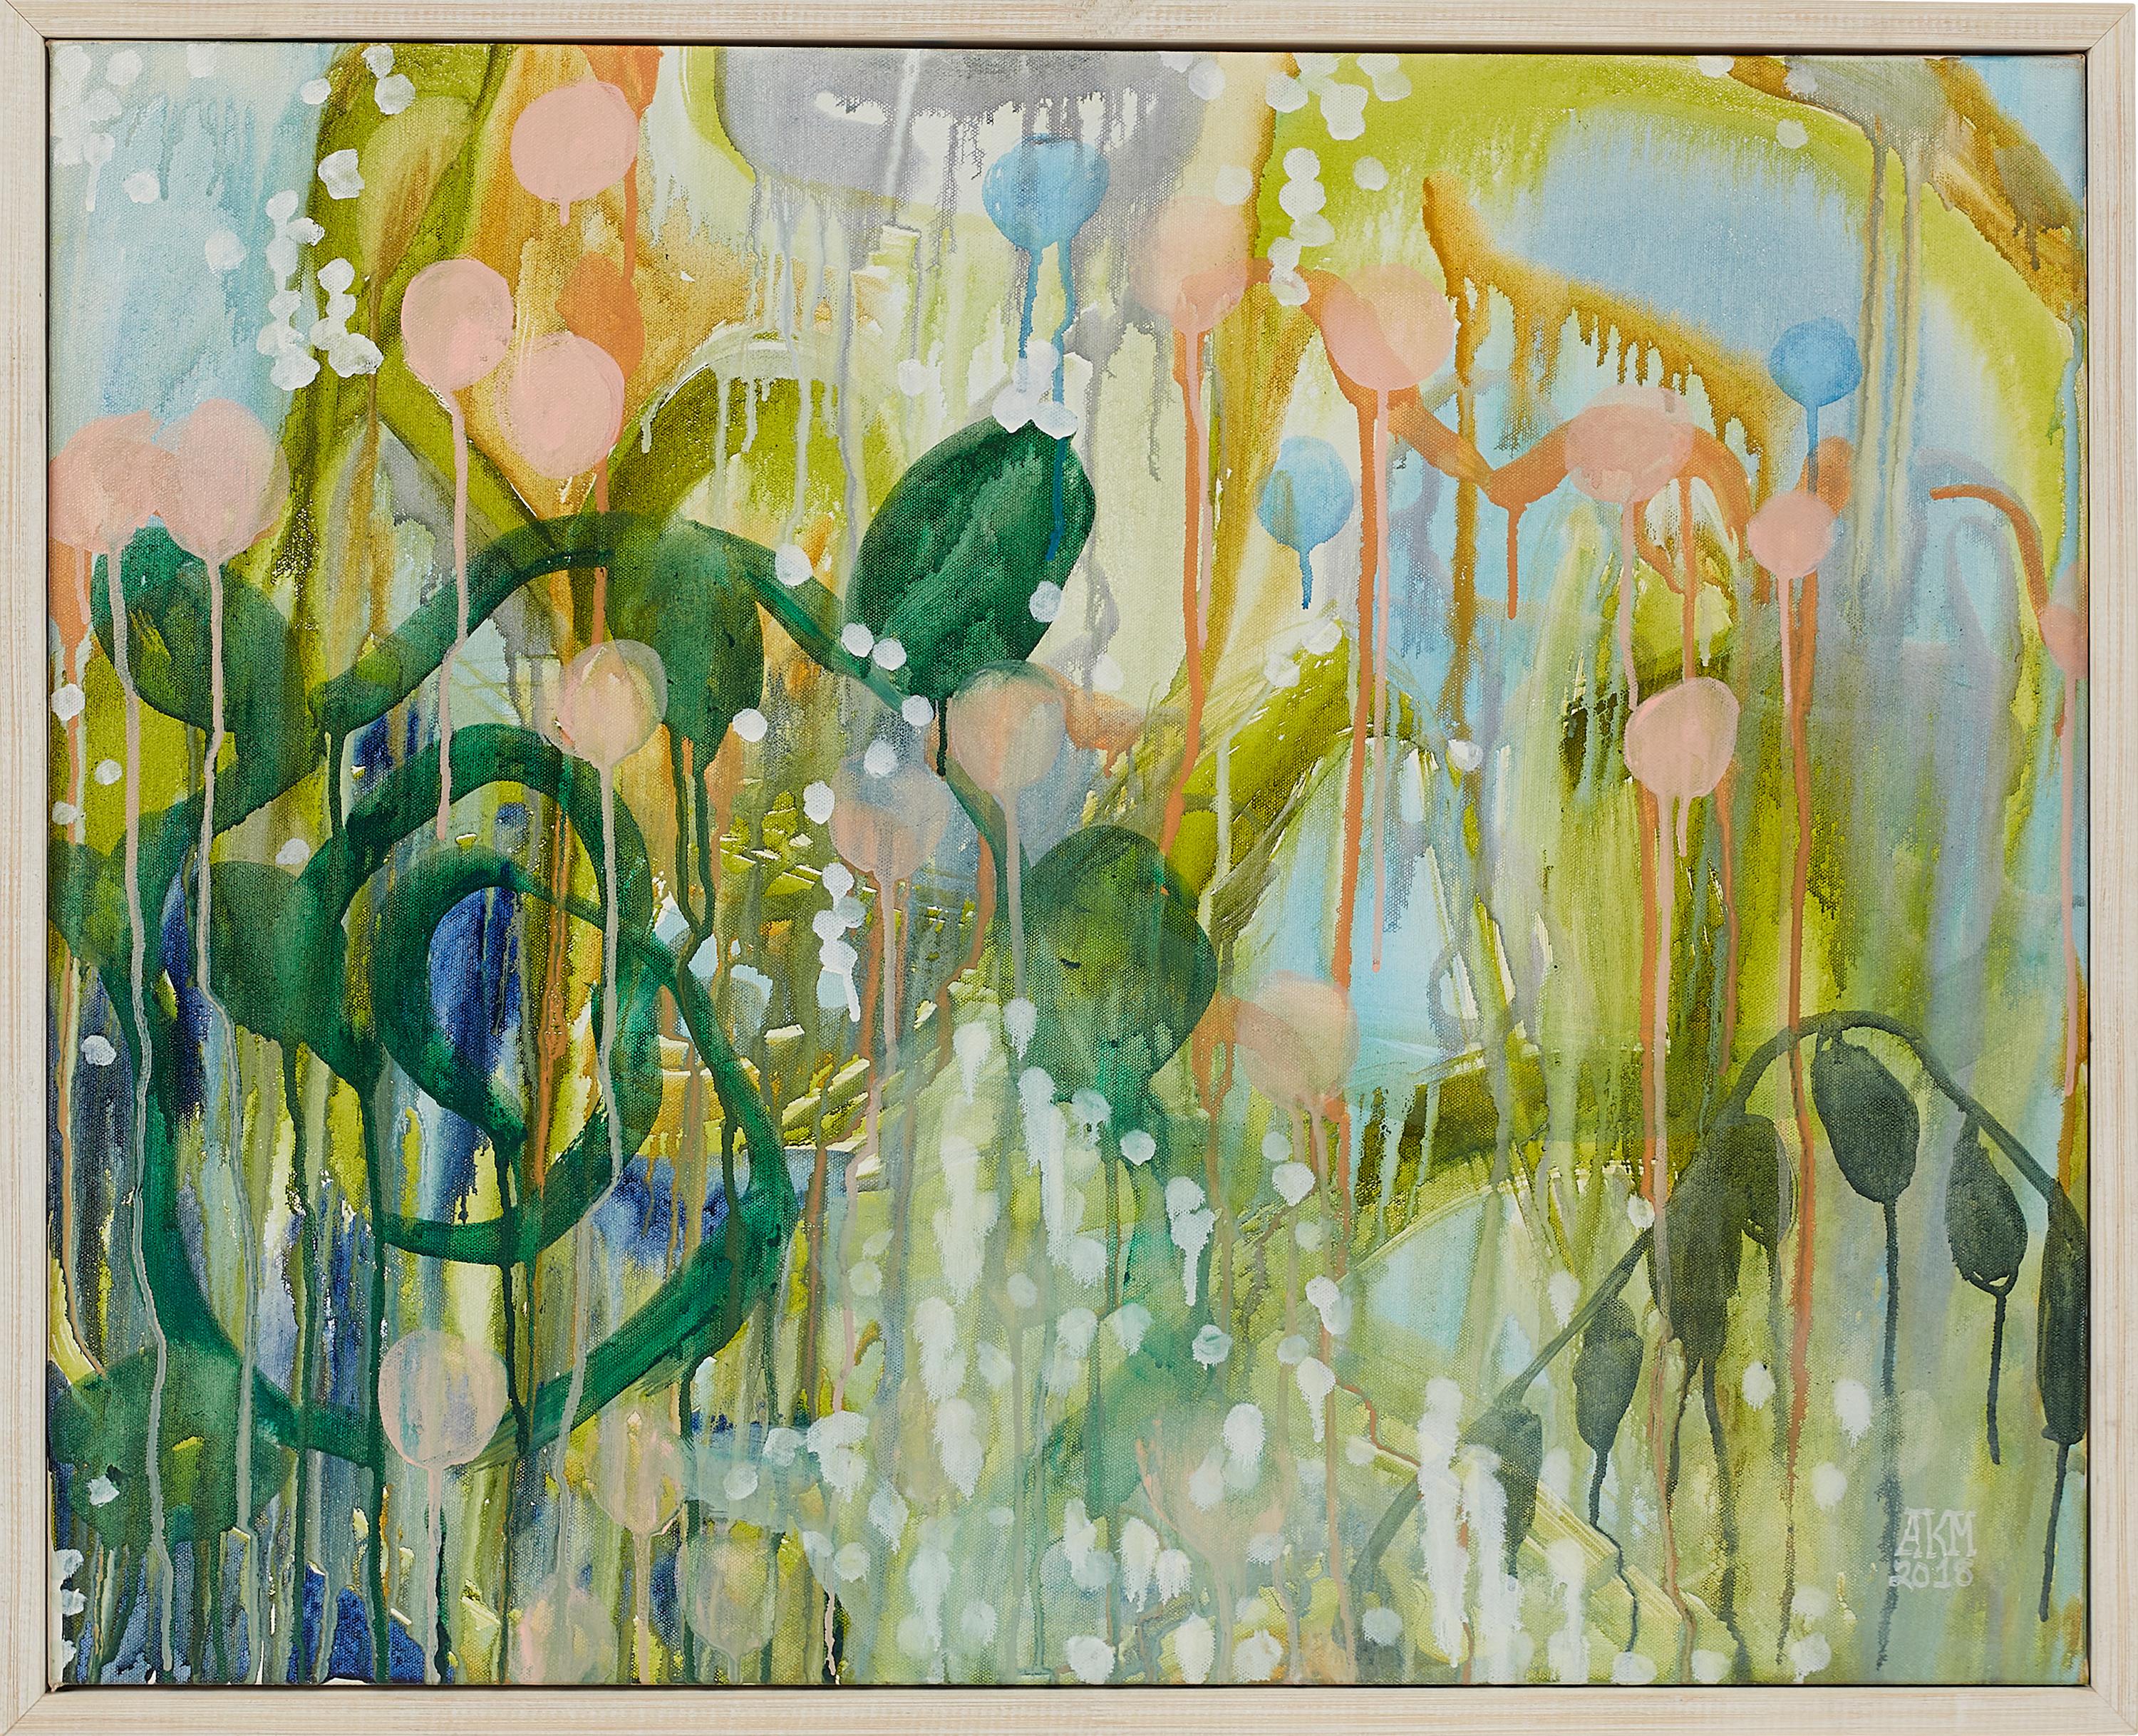 Alex K. Mason Landscape Painting - Abstract Nature Painting on Canvas, Framed. Acrylic, Ink. Greens, Blues, Peach